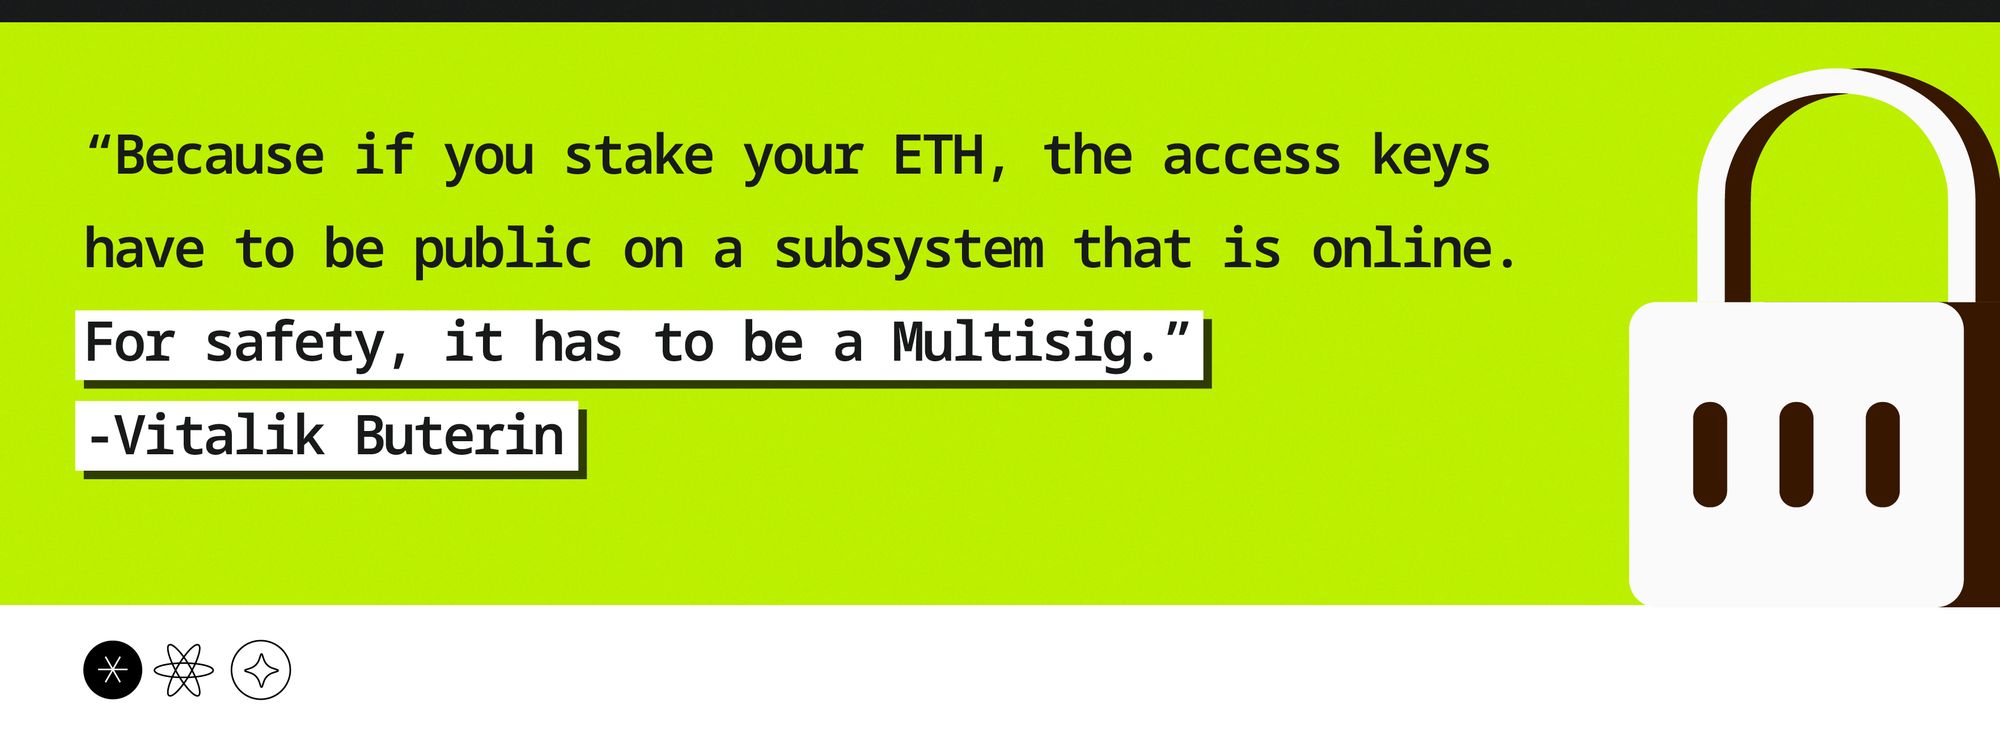 “Because if you stake your ETH, the keys that access it have to be public on a subsystem that is online. For safety, it has to be a Multisig. Multisig for staking is still fairly difficult to set up; it gets complicated in a bunch of ways.” - Vitalik Buterin